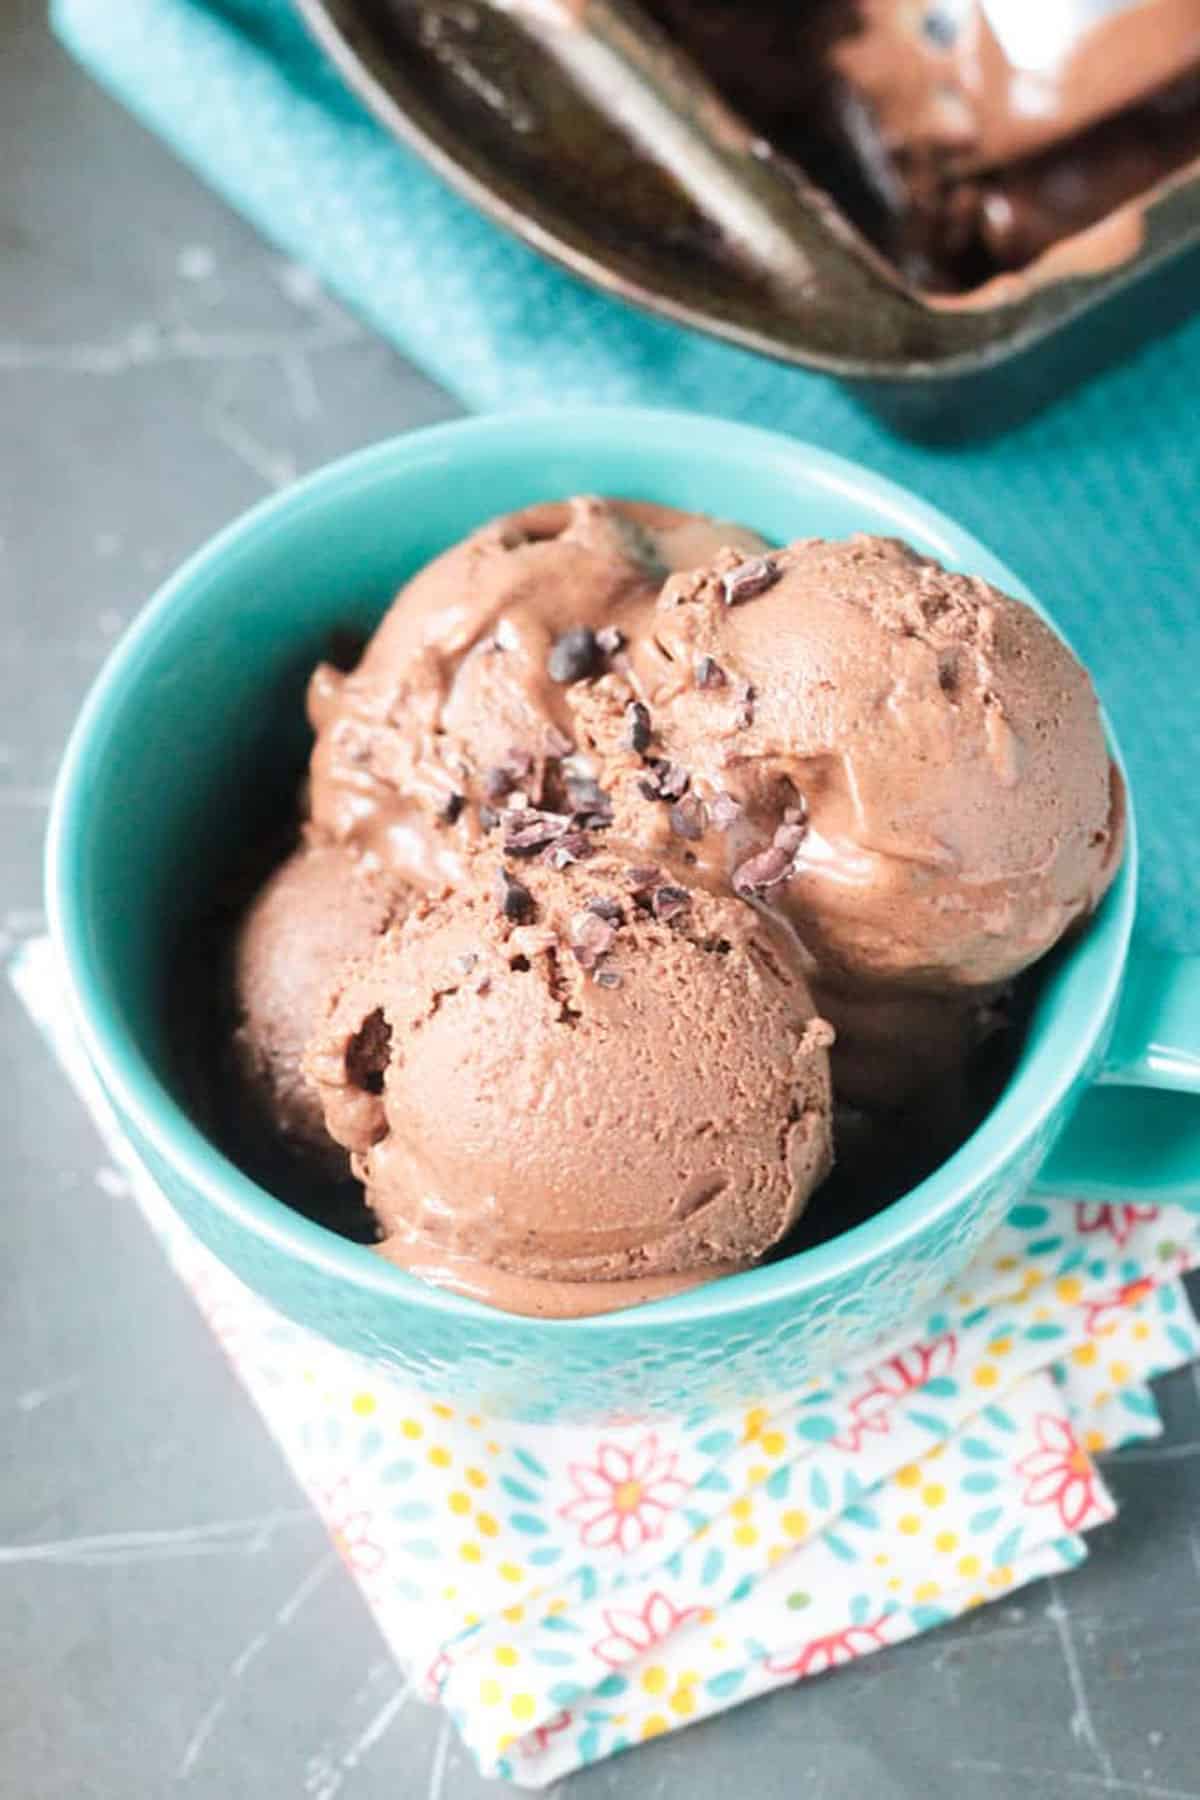 3 scoops of homemade chocolate ice cream in a blue bowl topped with cacao nibs